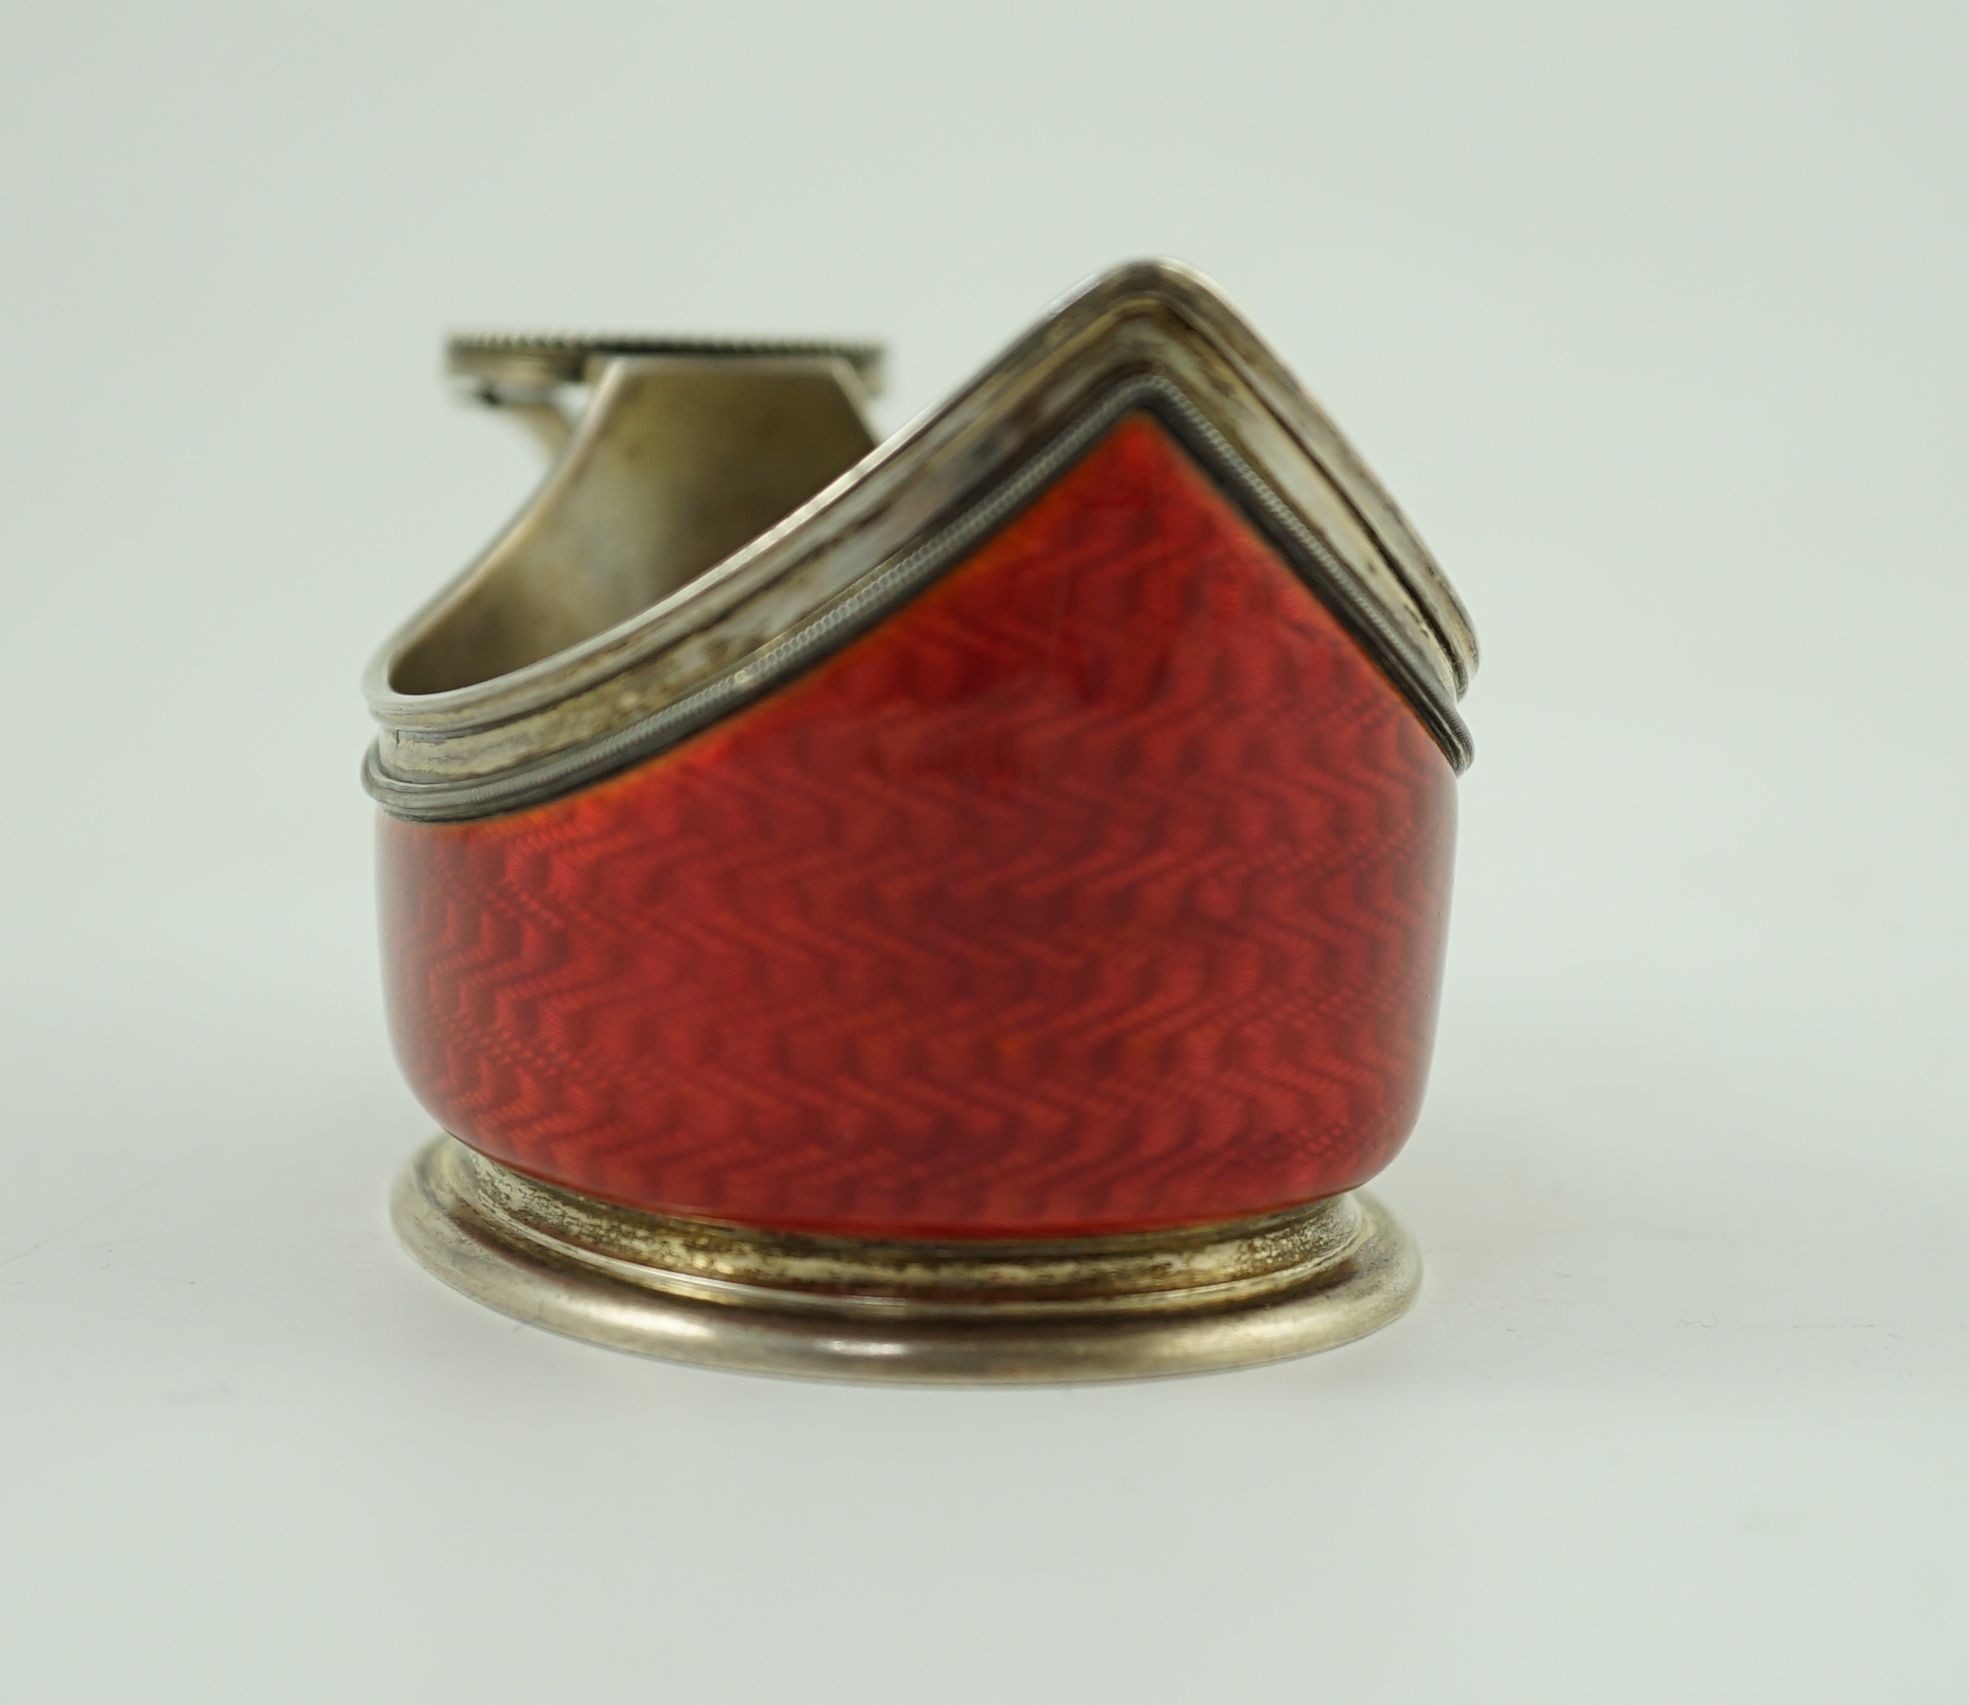 CARL FABERGE: A late 19th/early 20th century 88 zolotnik and red guilloche enamel oval kovsh, work master Anders Johan Nevalainen